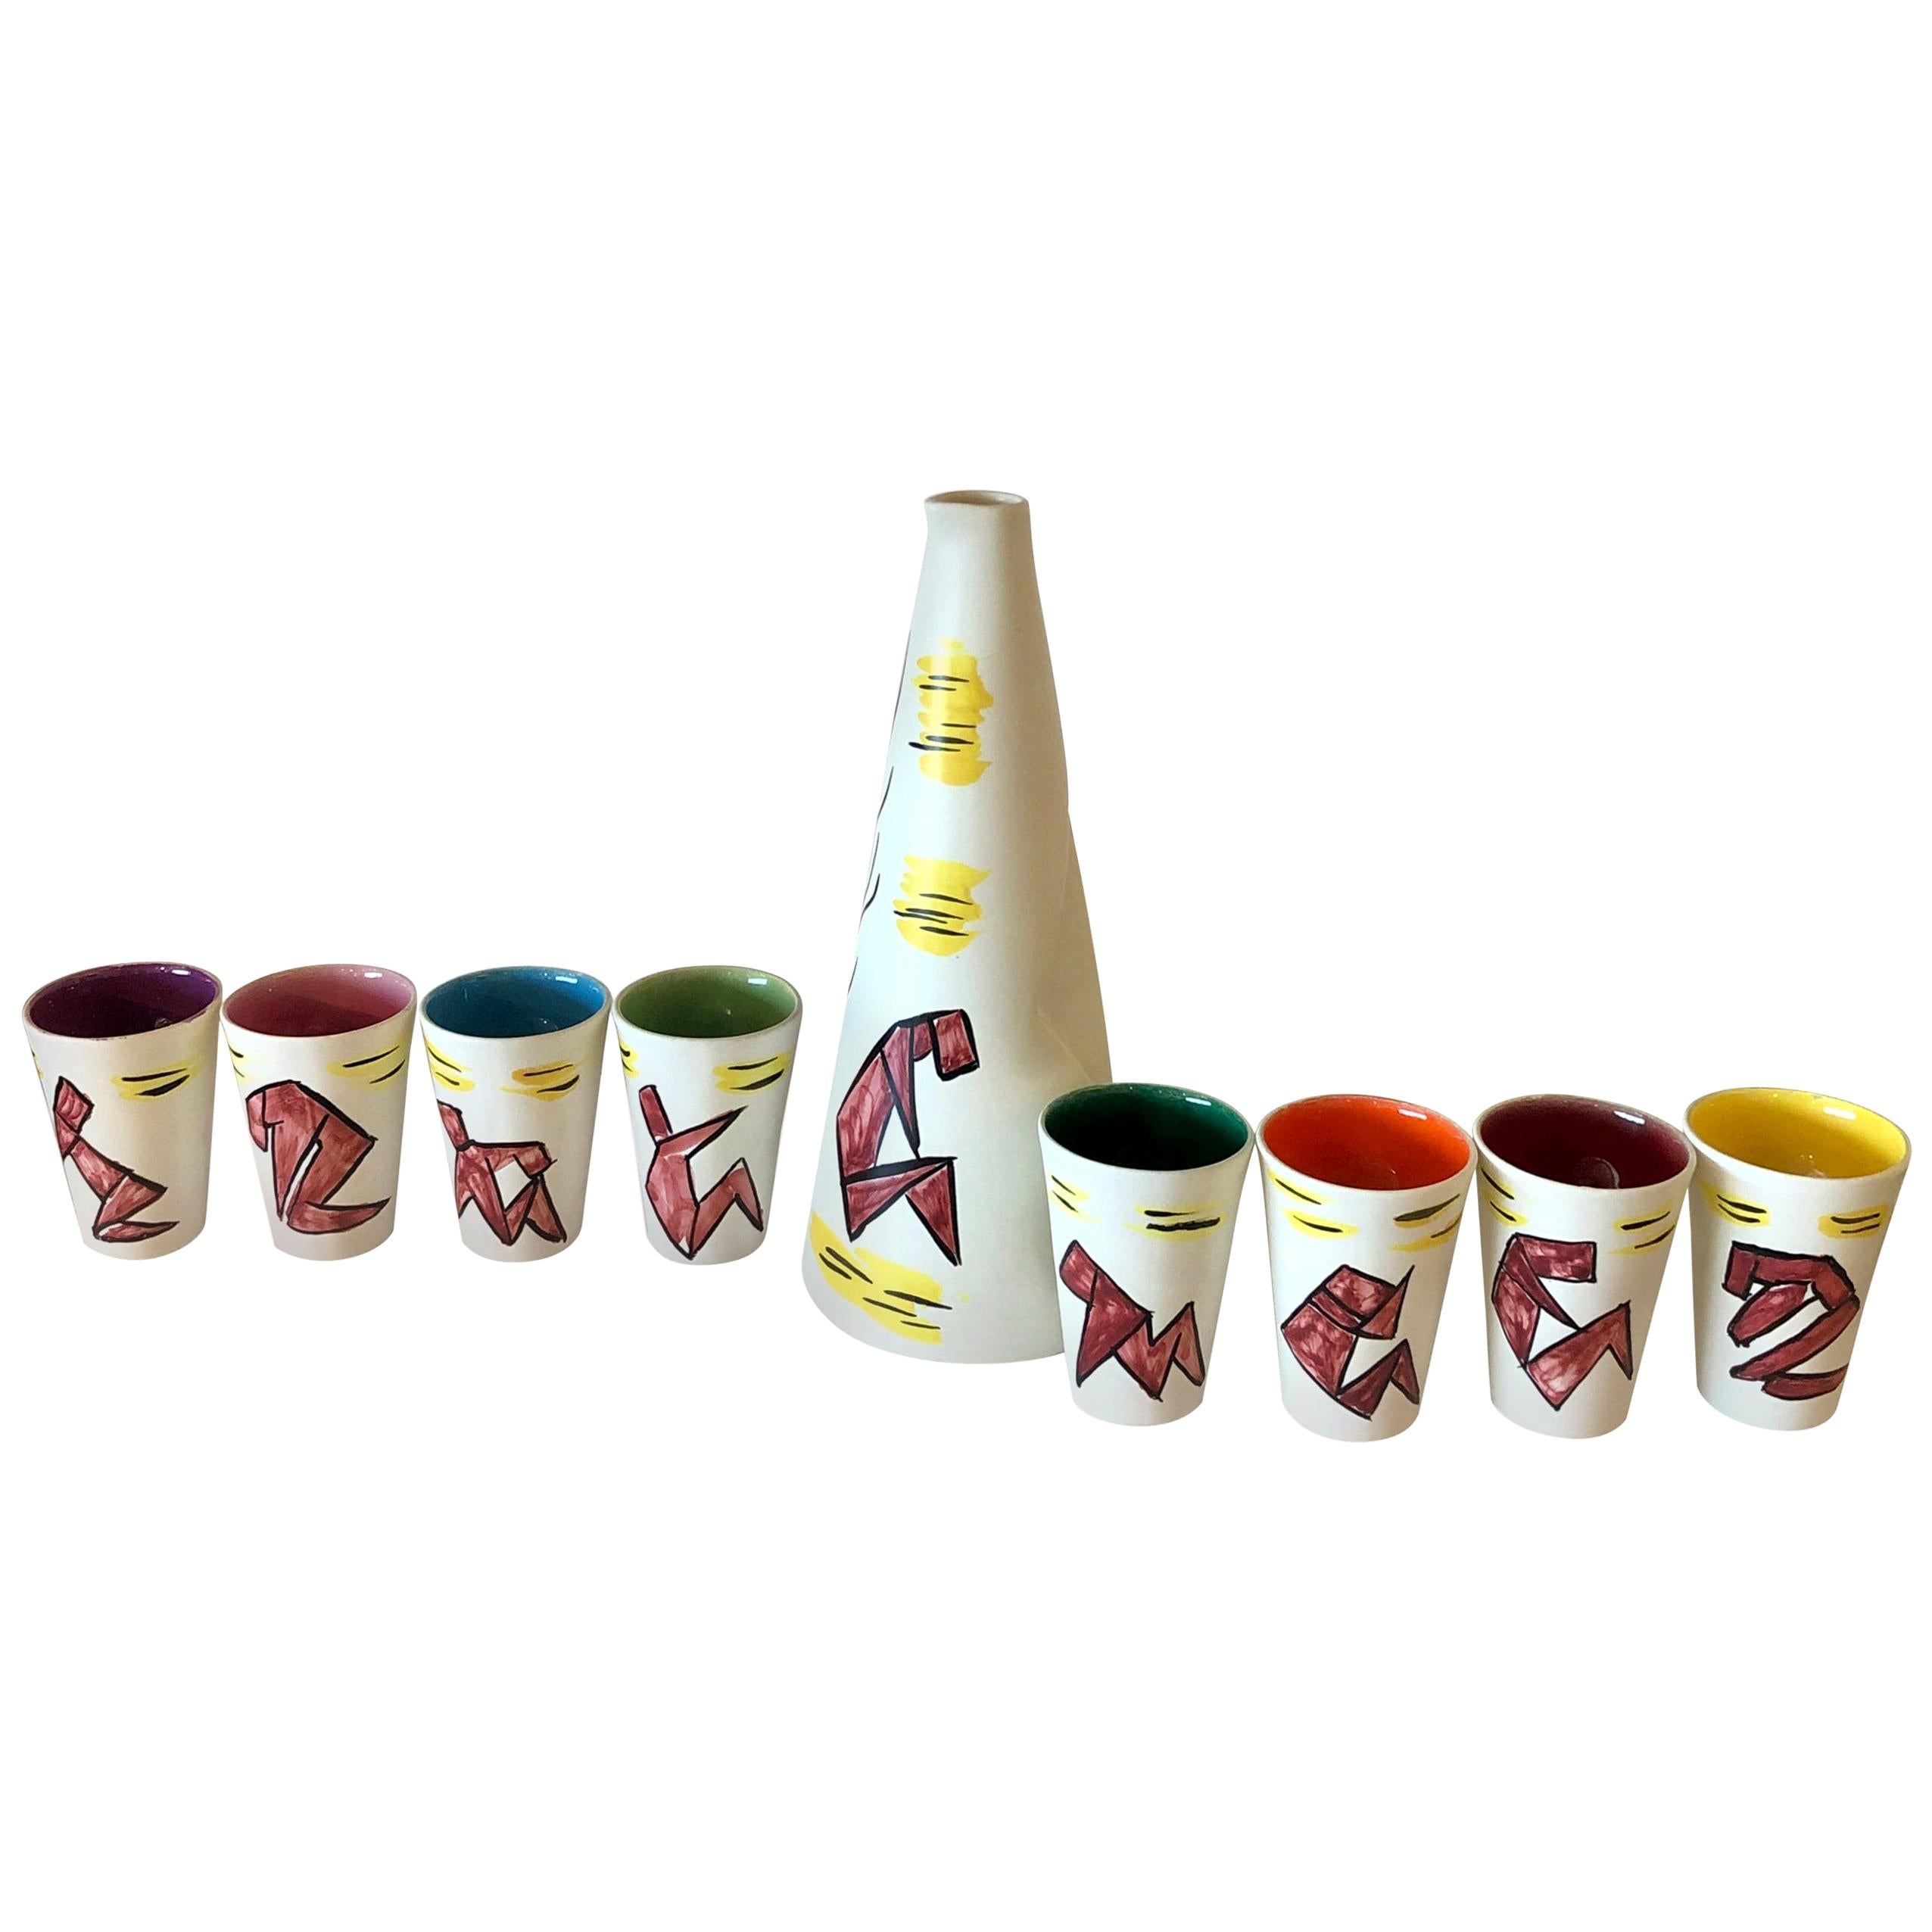 S/9 Vallauris Ivory, Yellow, Blue, Green, Red & Purple Ceramic Carafe W/ 8 Cups For Sale